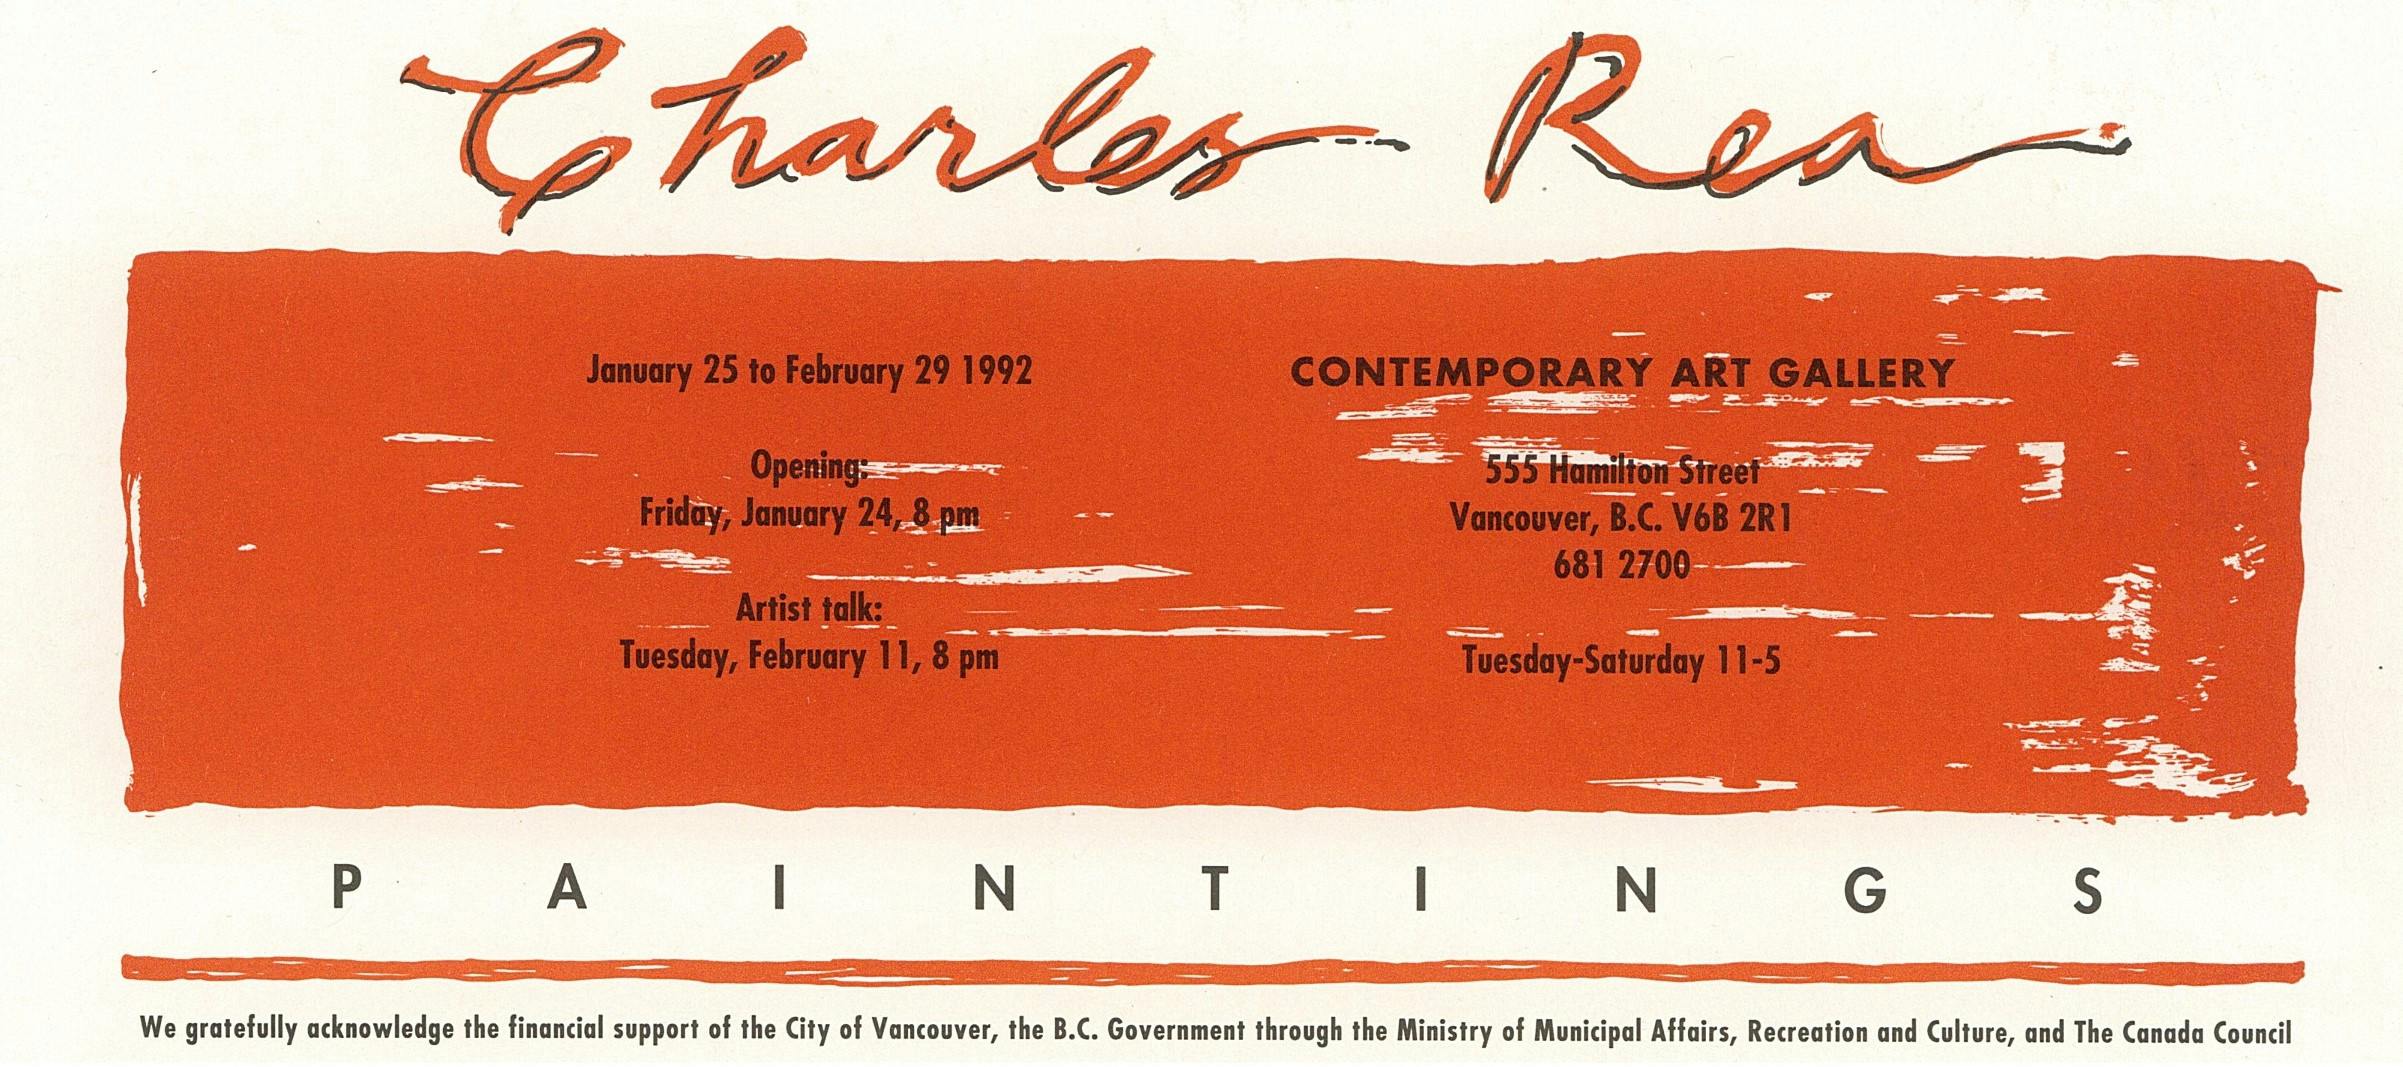 A scanned exhibition invitation with a white background. “Charles Rea” is written in an orange cursive font. Beneath it is an orange rectangle with black text detailing information about events. 